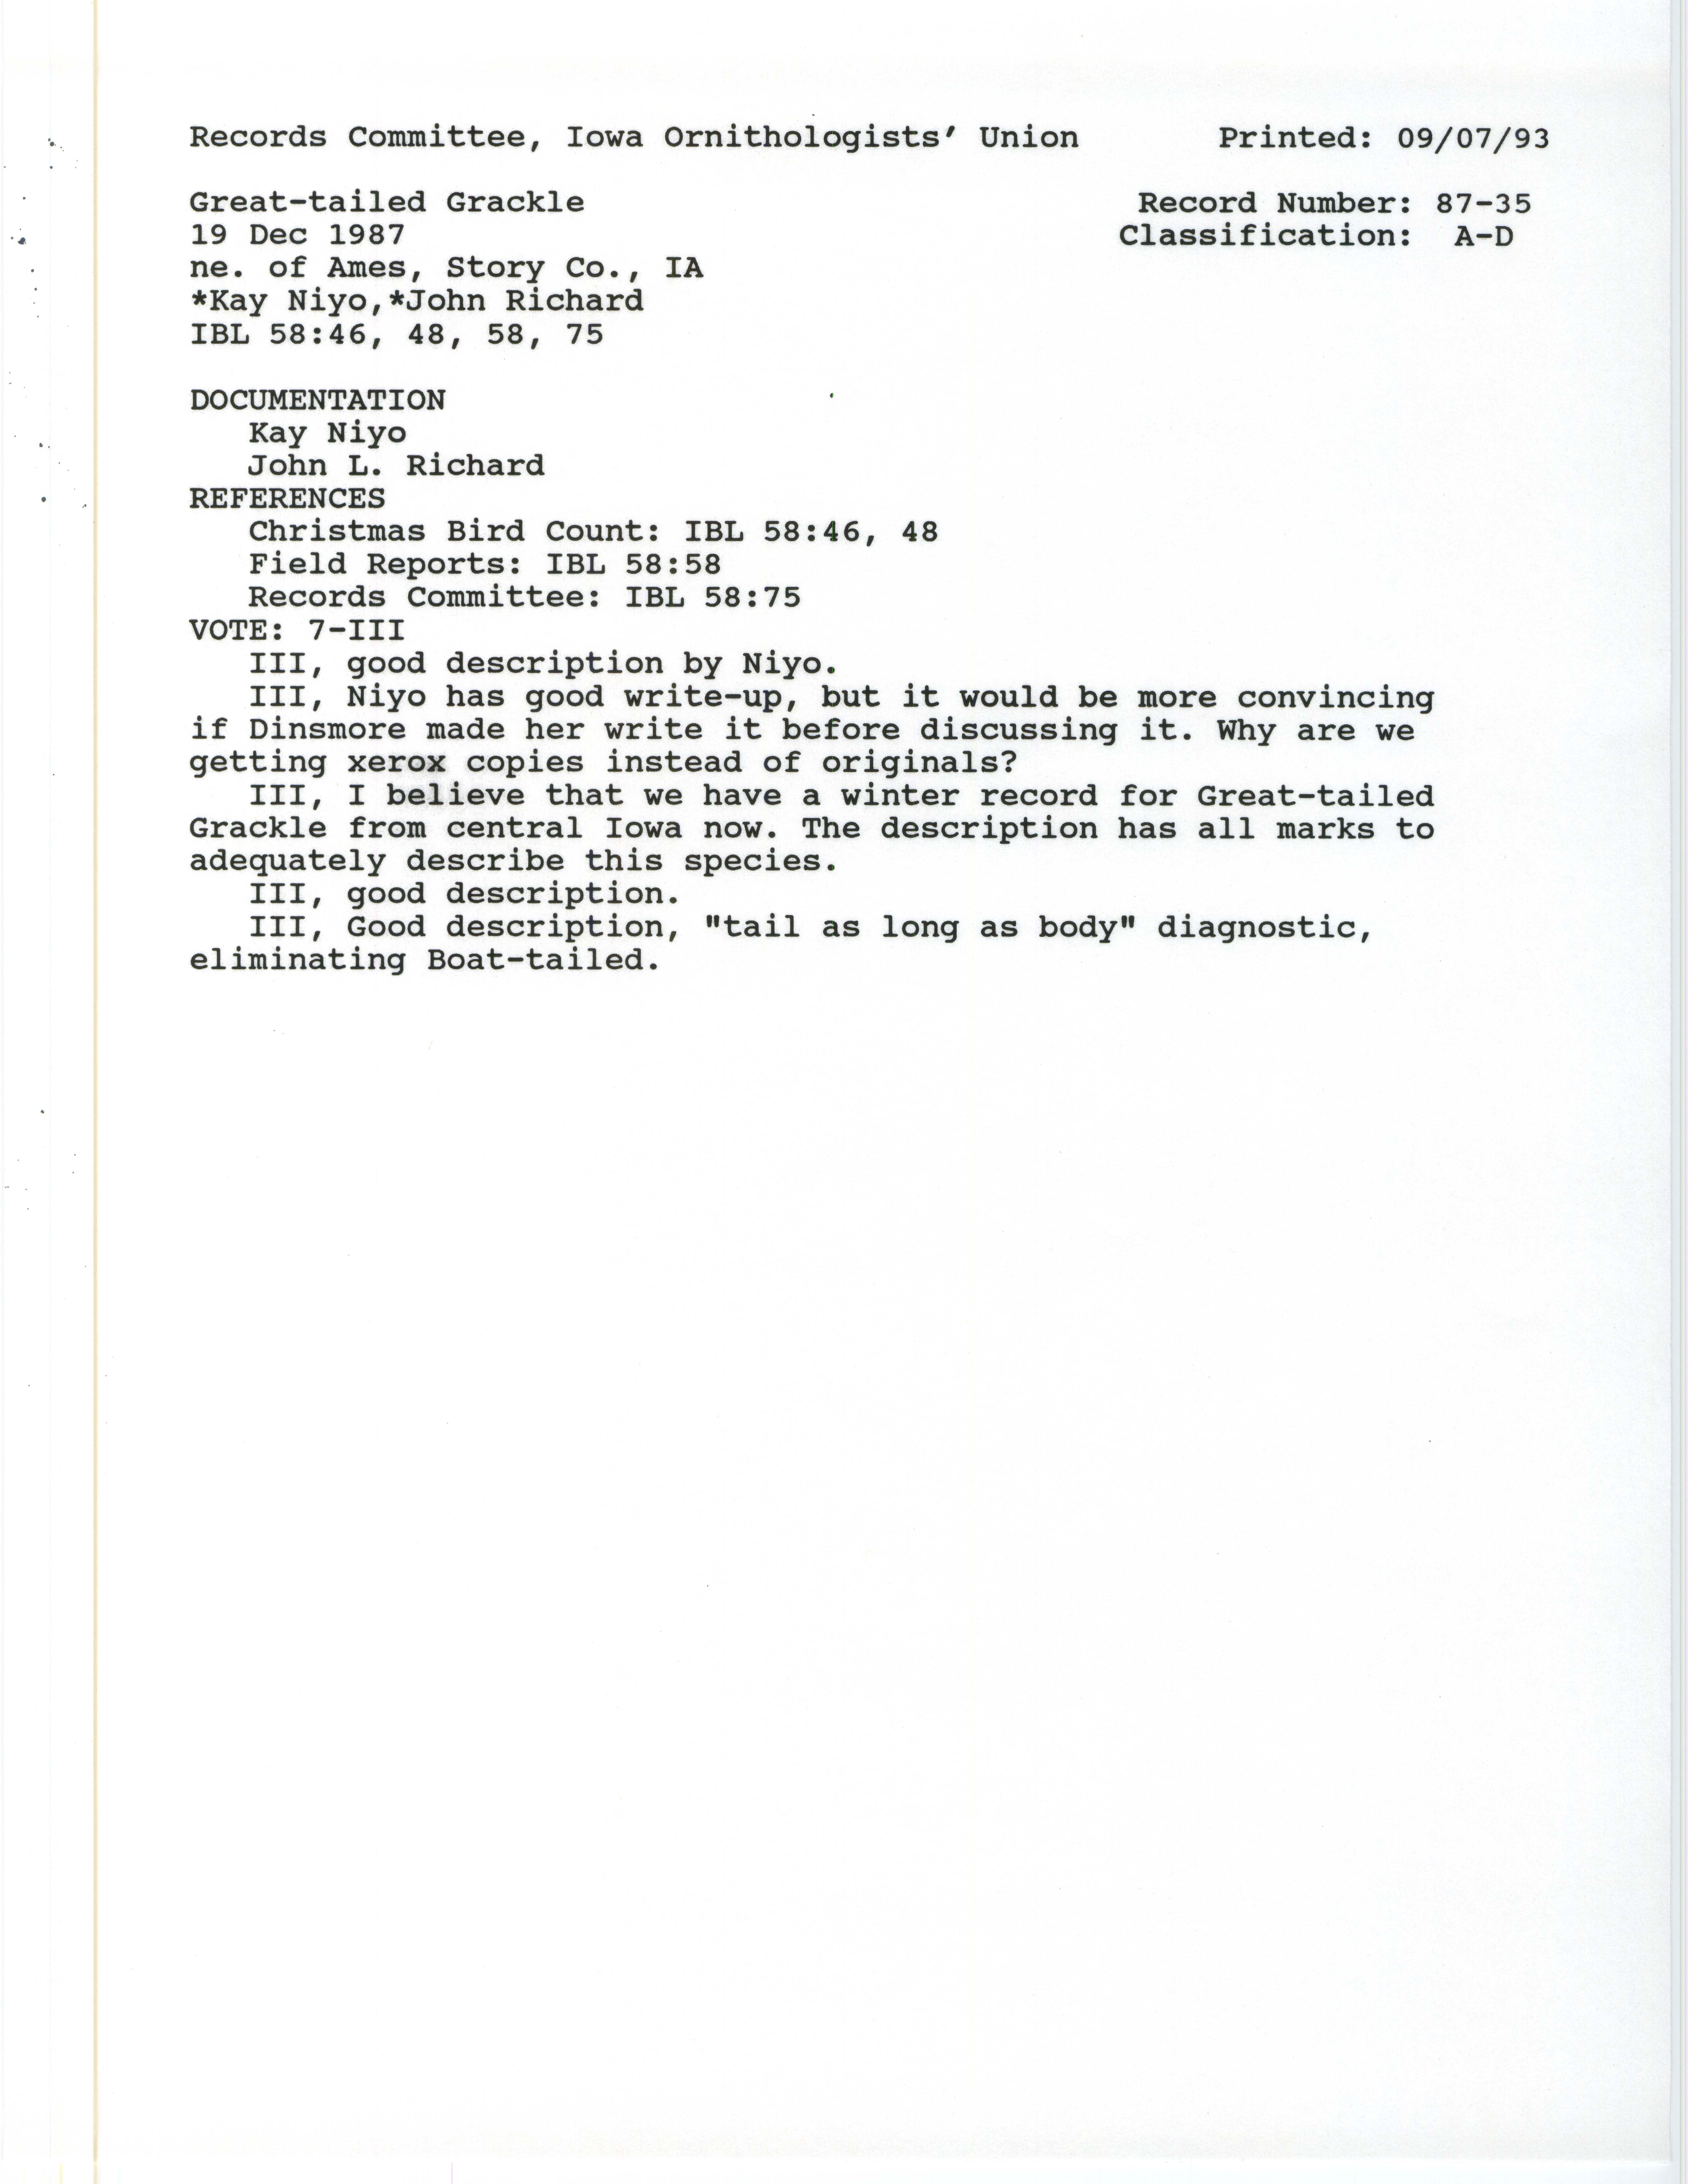 Records Committee review for rare bird sighting for Great-tailed Grackle at Ames, 1987